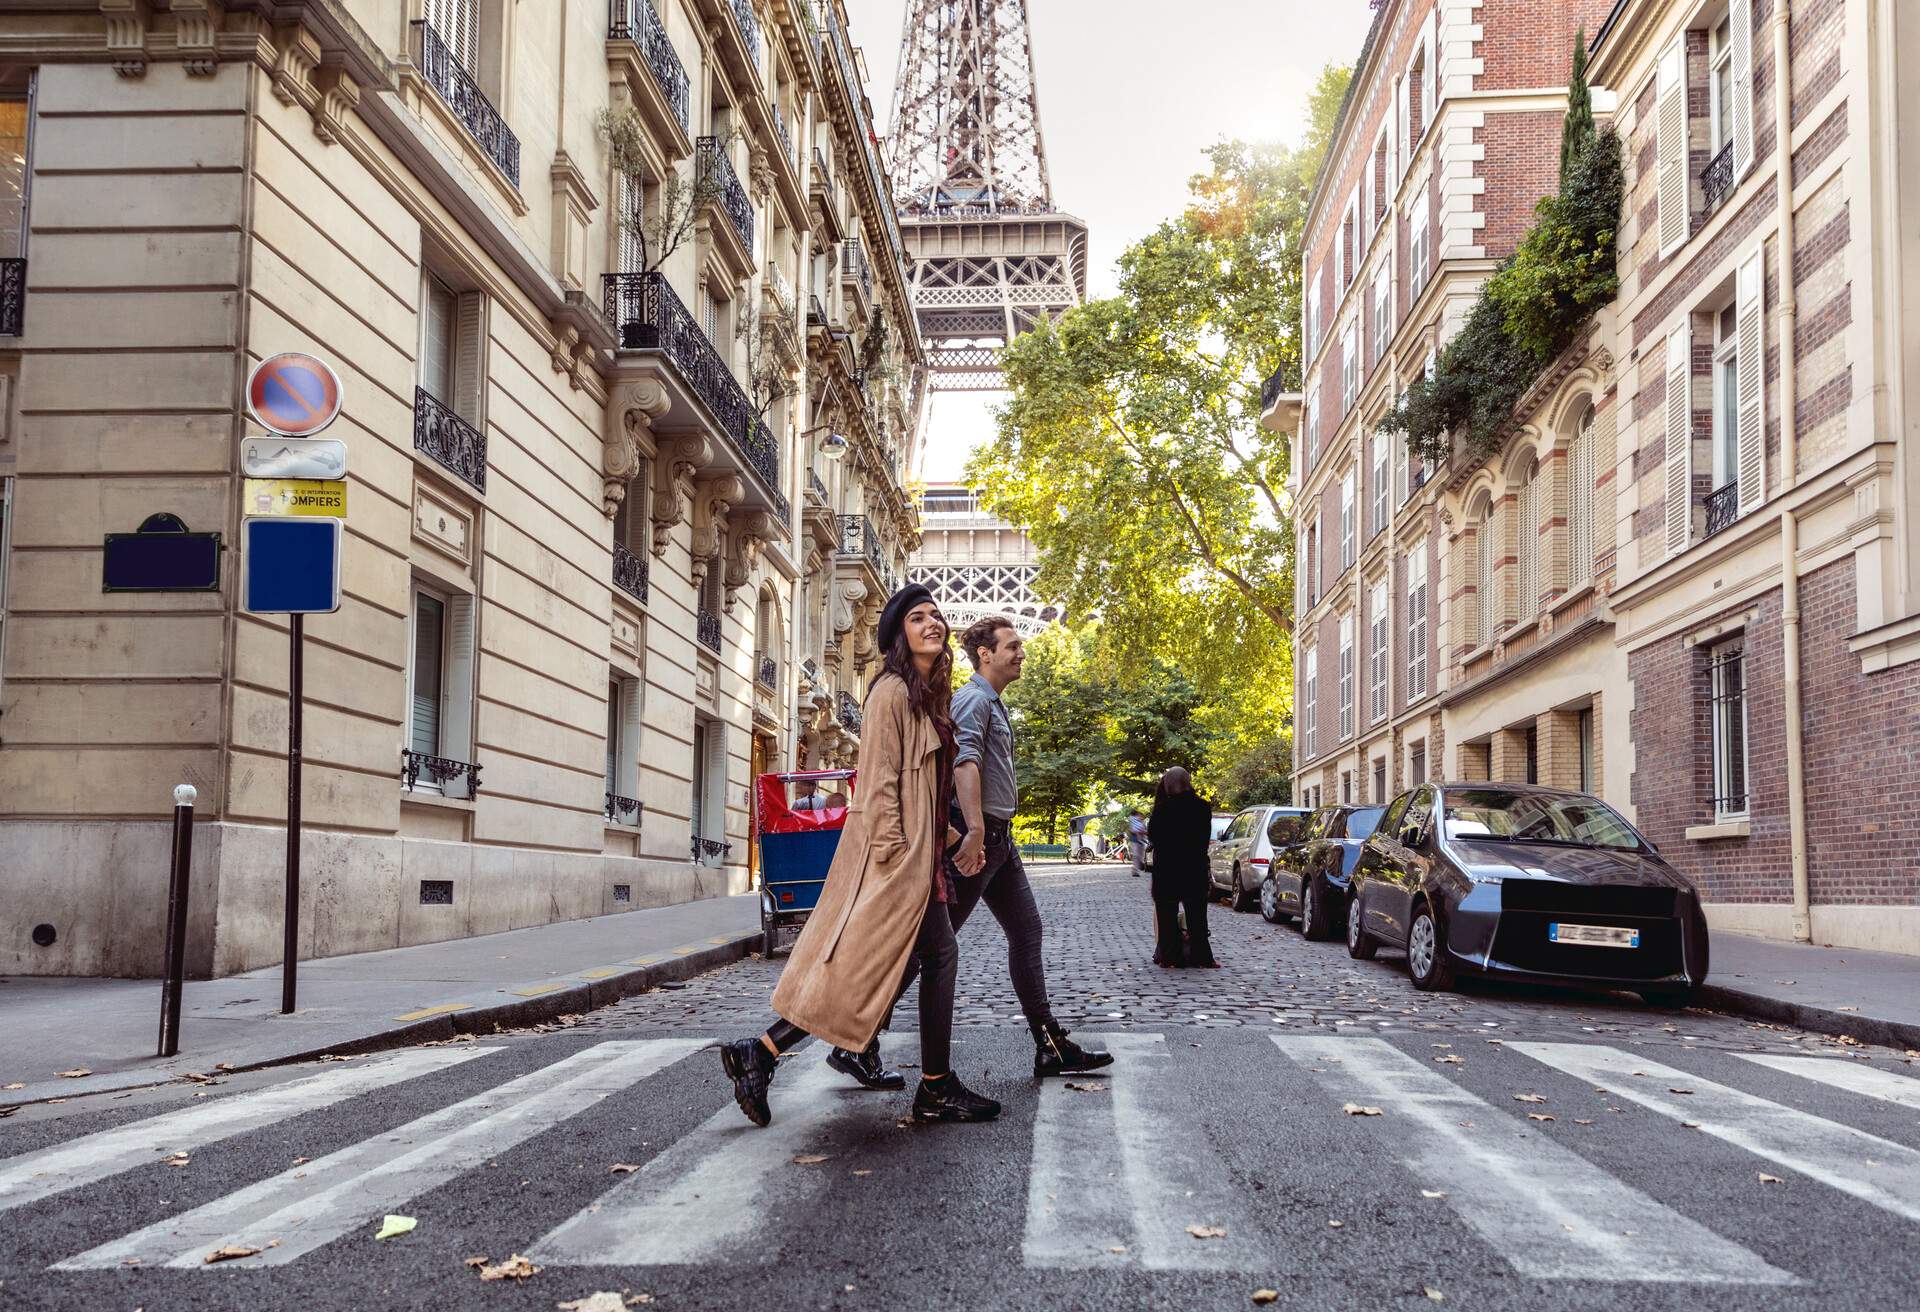 A couple dressed casually crosses a pedestrian crosswalk with the Eiffel Tower in the background.